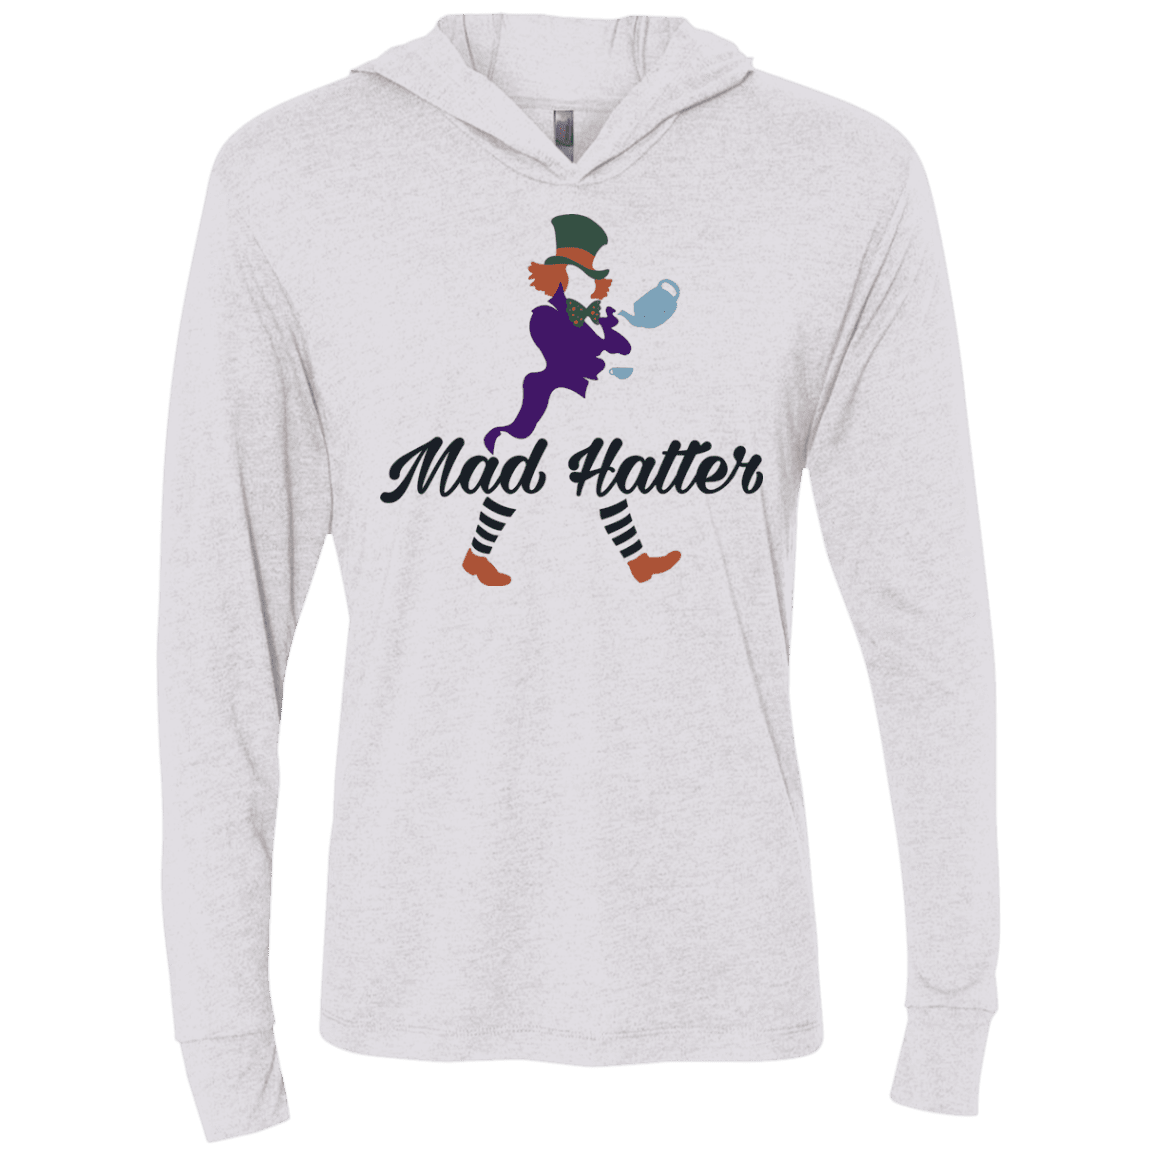 T-Shirts Heather White / X-Small Mad Hattter Triblend Long Sleeve Hoodie Tee